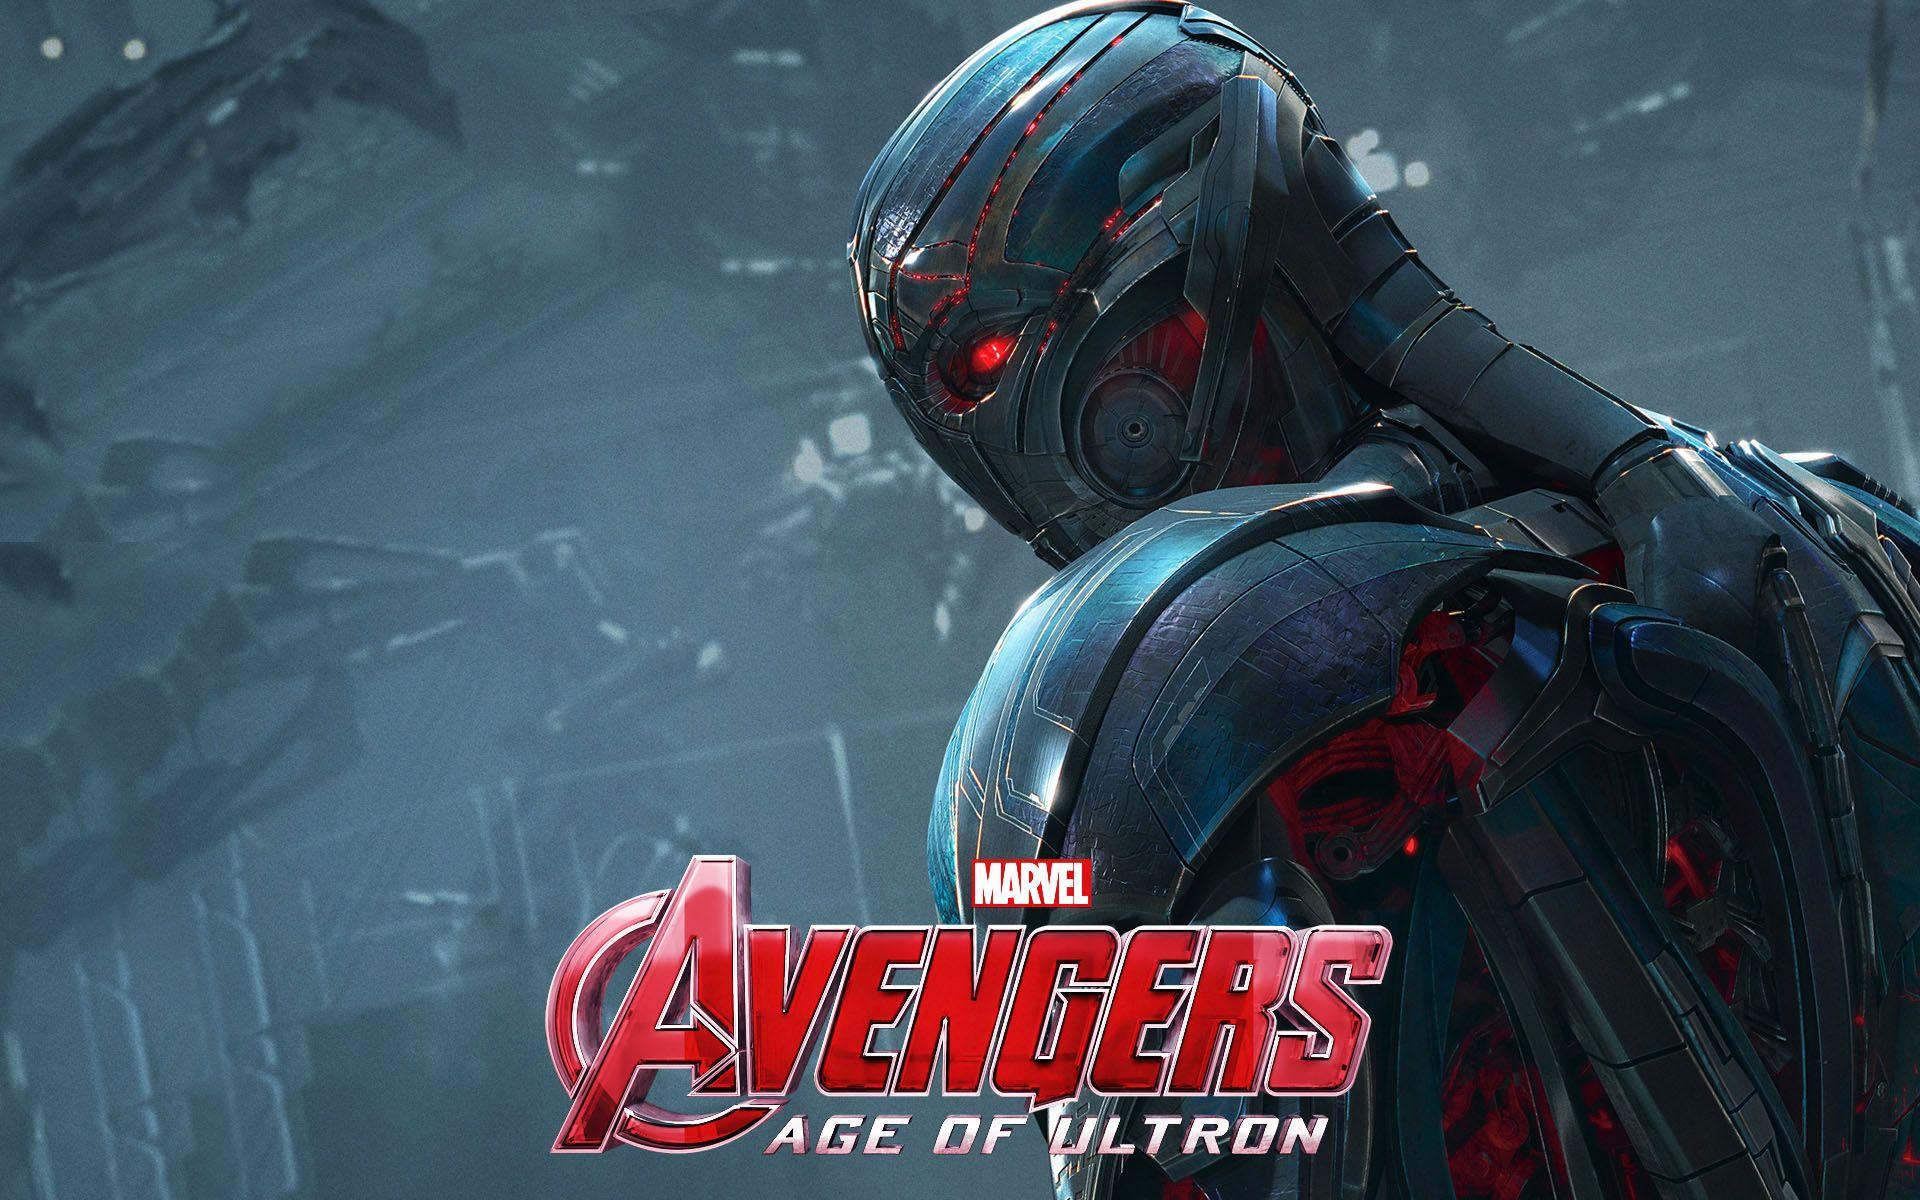 Captain America Age of Ultron Wallpapers - Top Free Captain America Age